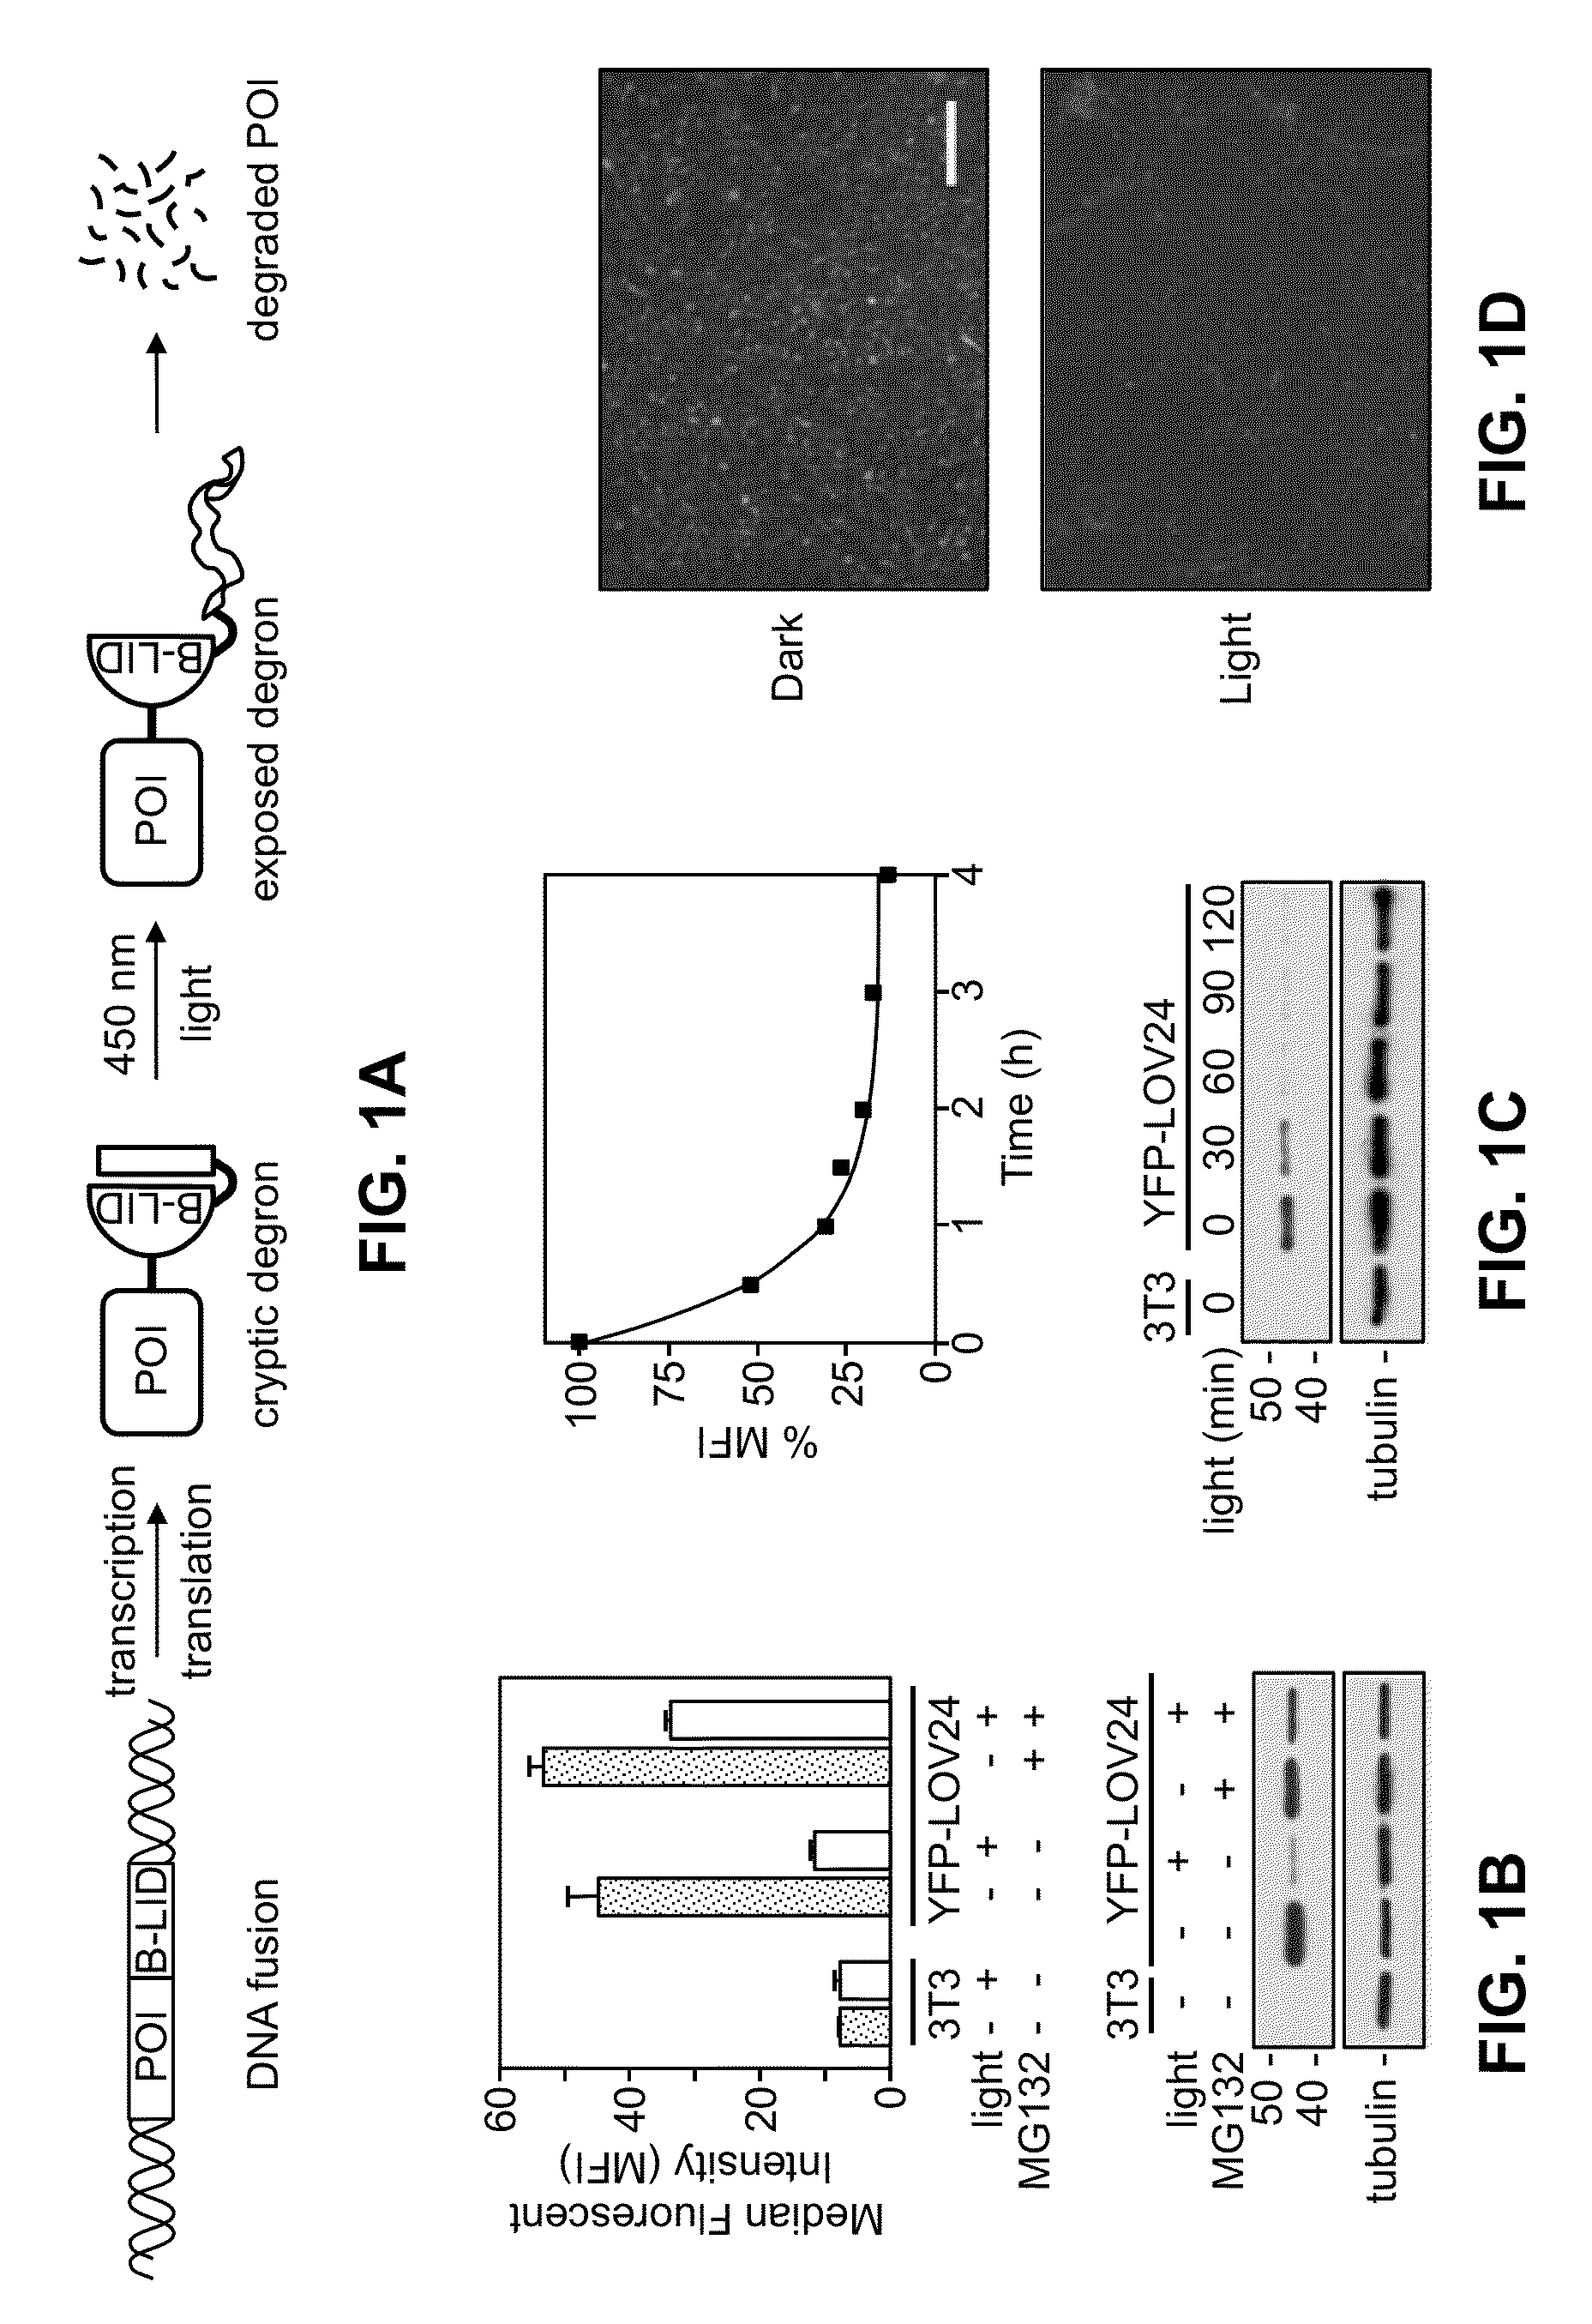 Light-inducible system for regulating protein stability